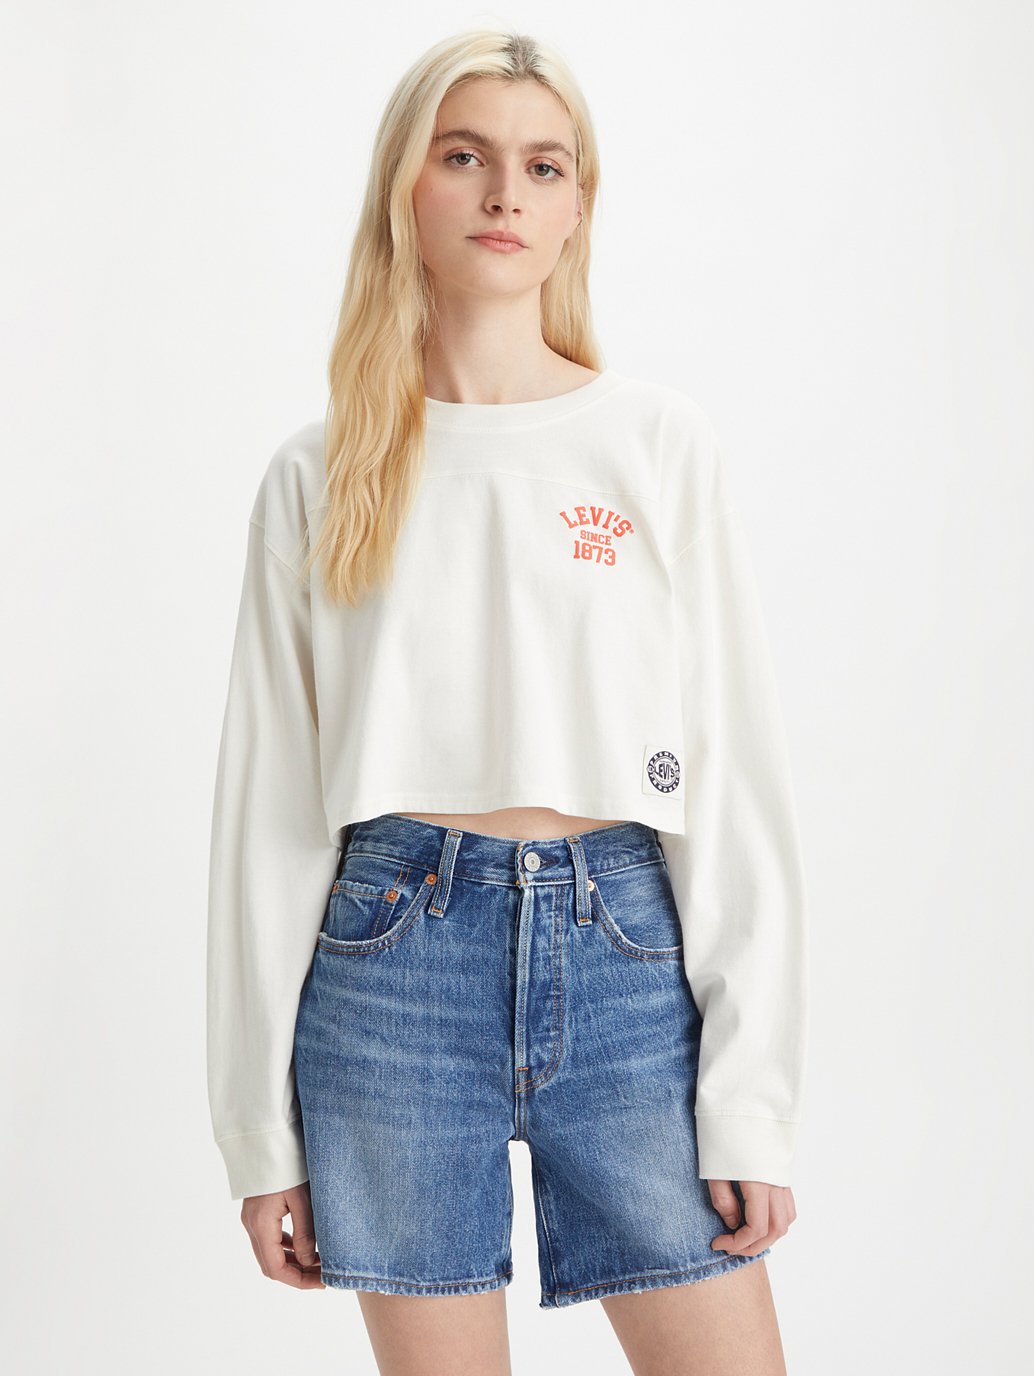 Graphic Cropped Football Tee in Ls Levi'S Since 1873 Tofu